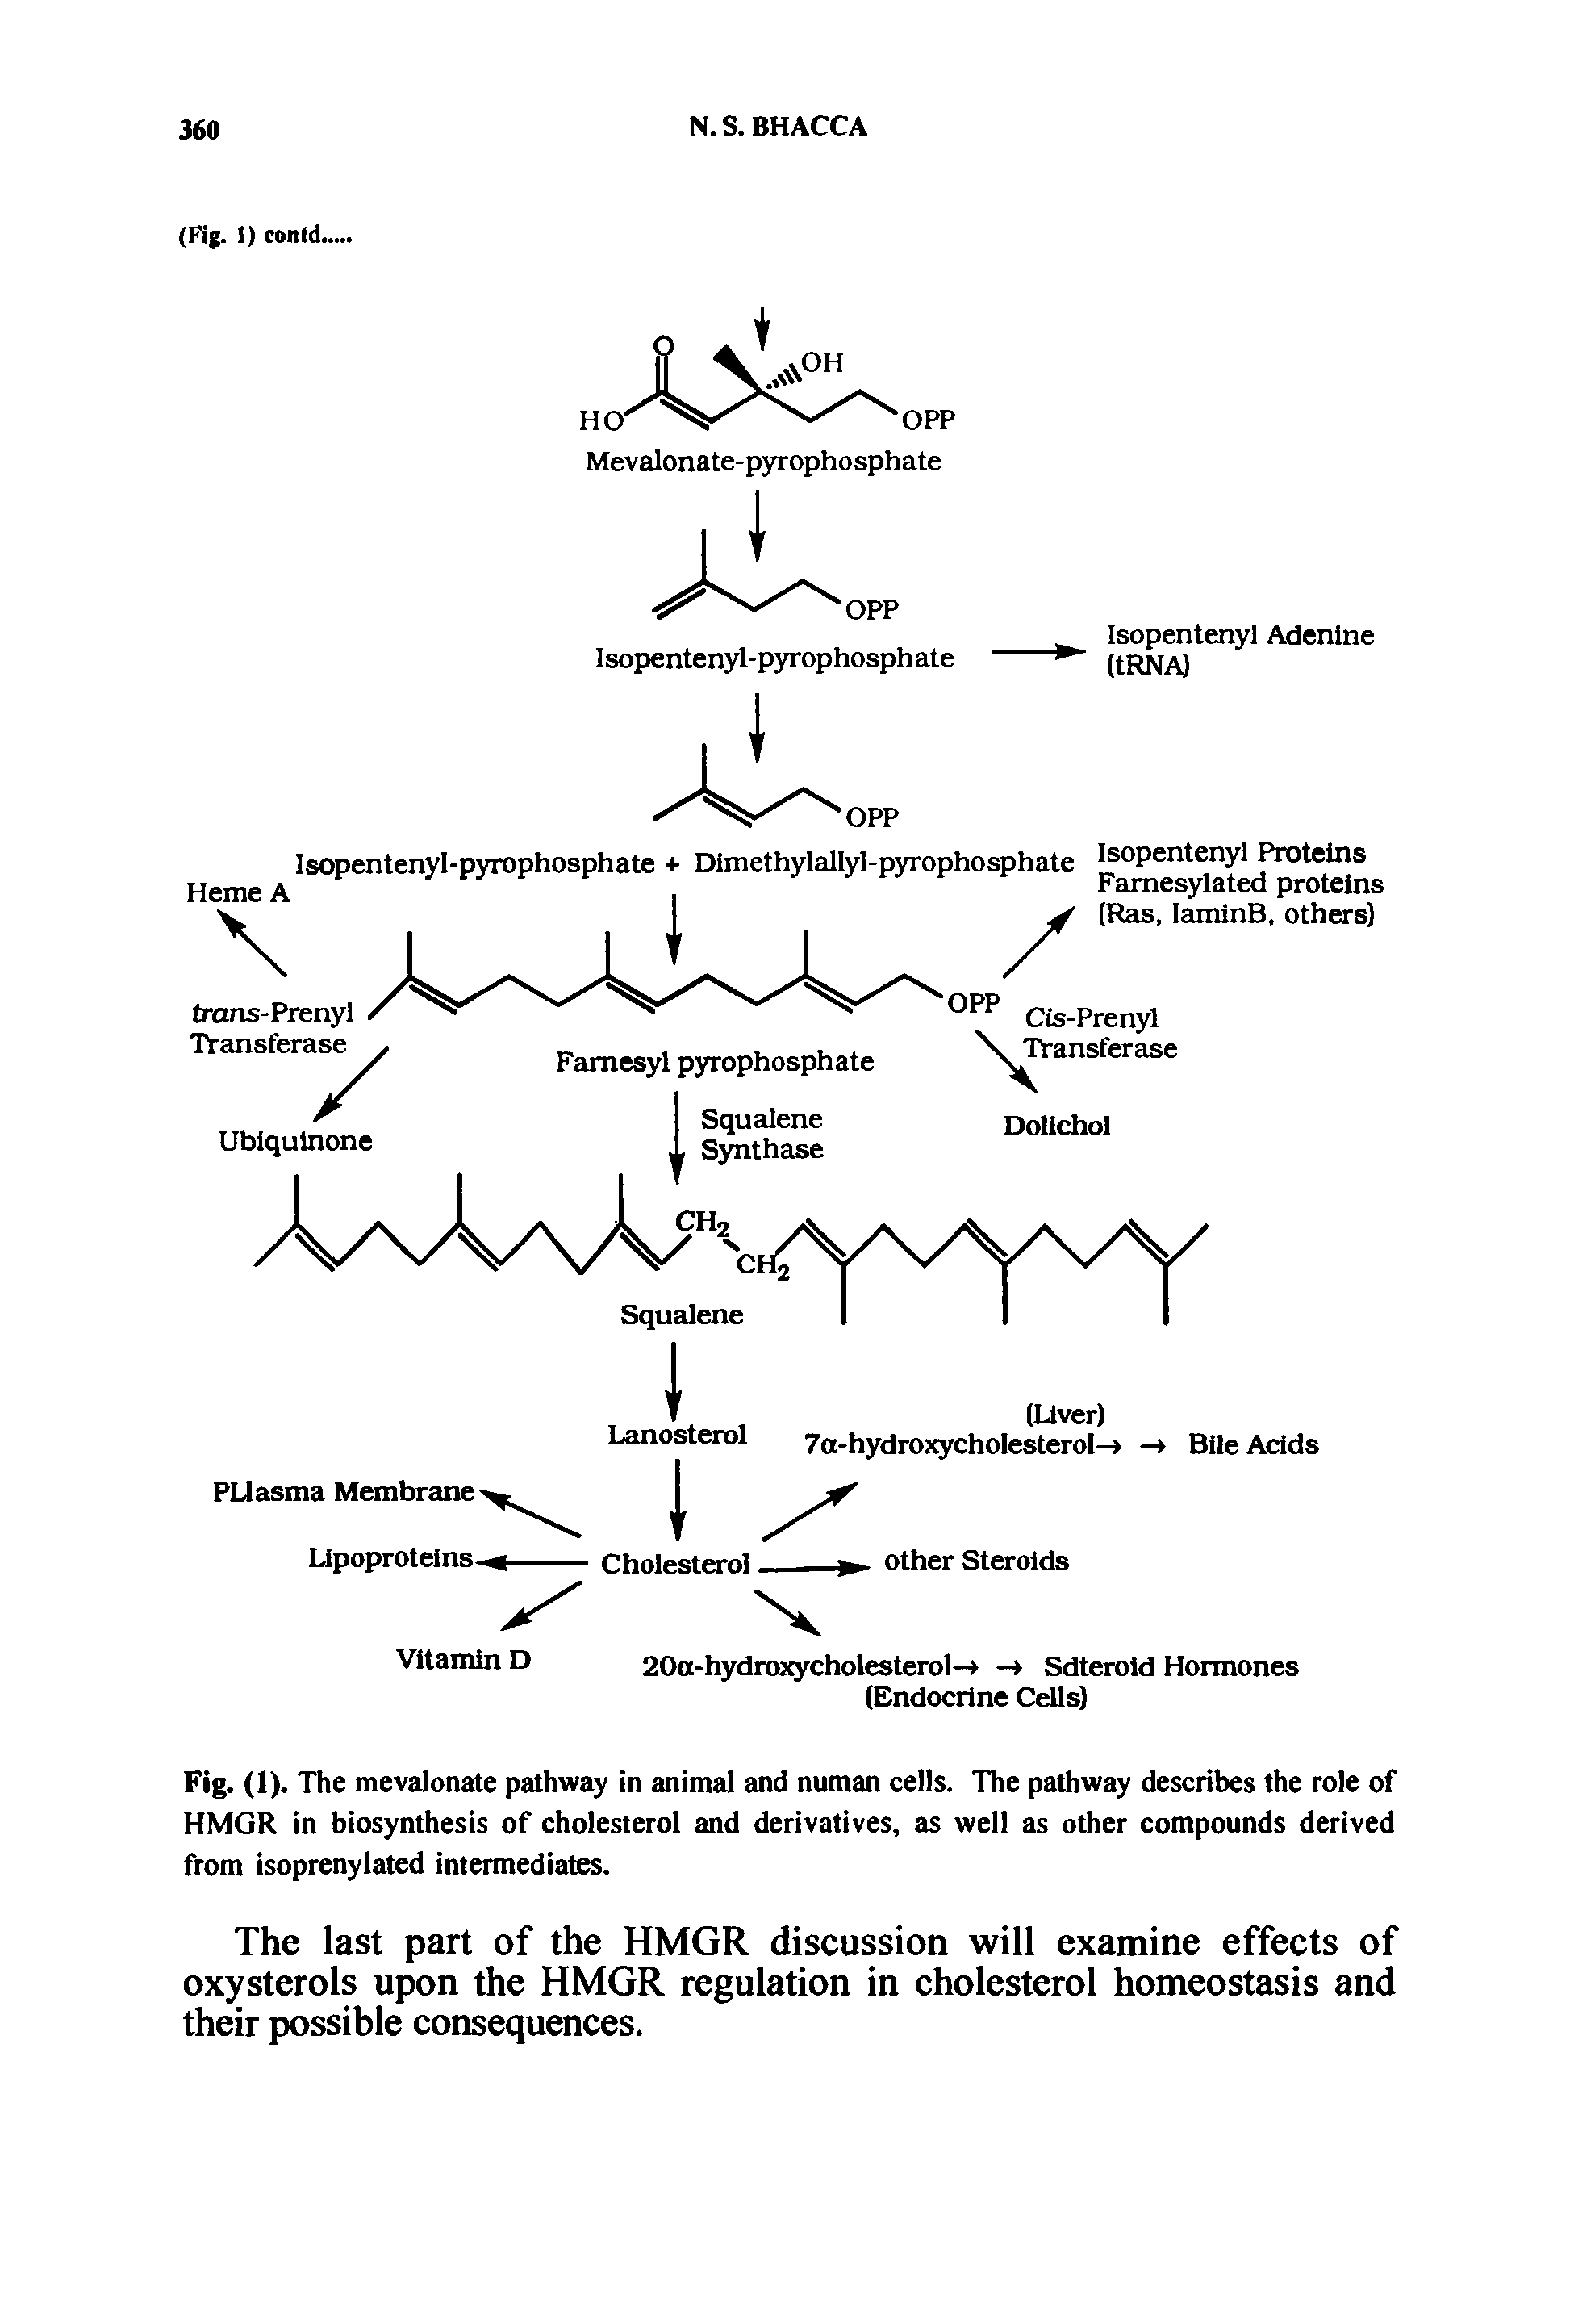 Fig. (1). The mevalonate pathway in animal and numan cells. The pathway describes the role of HMGR in biosynthesis of cholesterol and derivatives, as well as other compounds derived from isoprenylated intermediates.